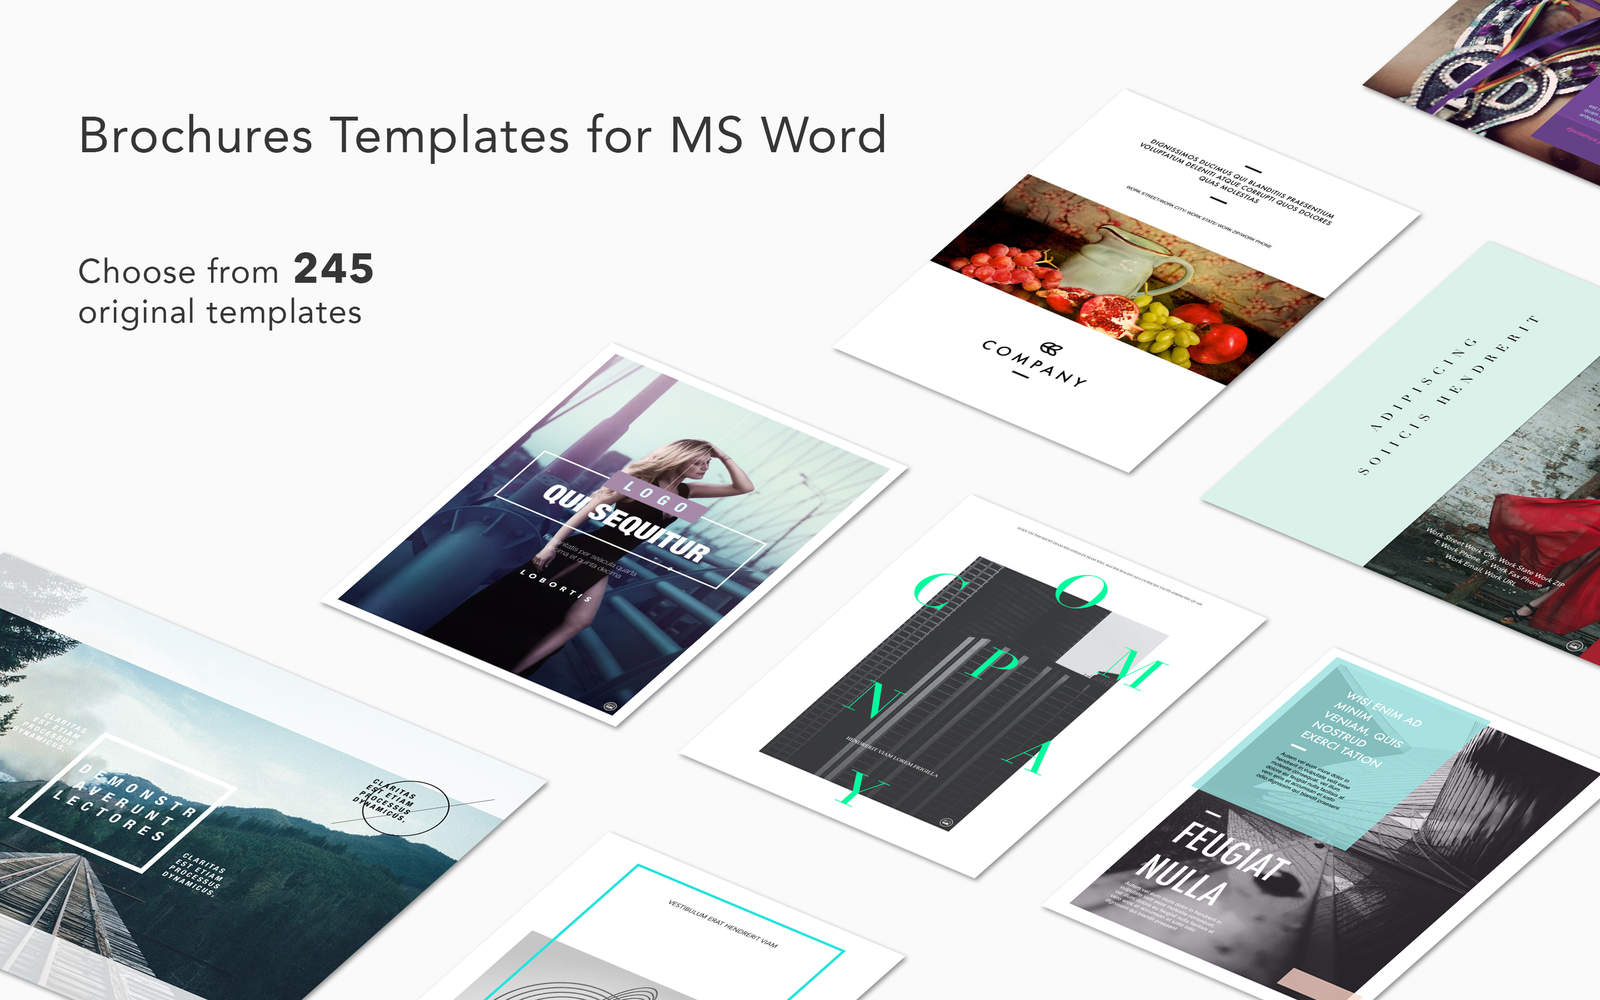 Brochures Templates for MS Word by GN 1.1 : Main Window